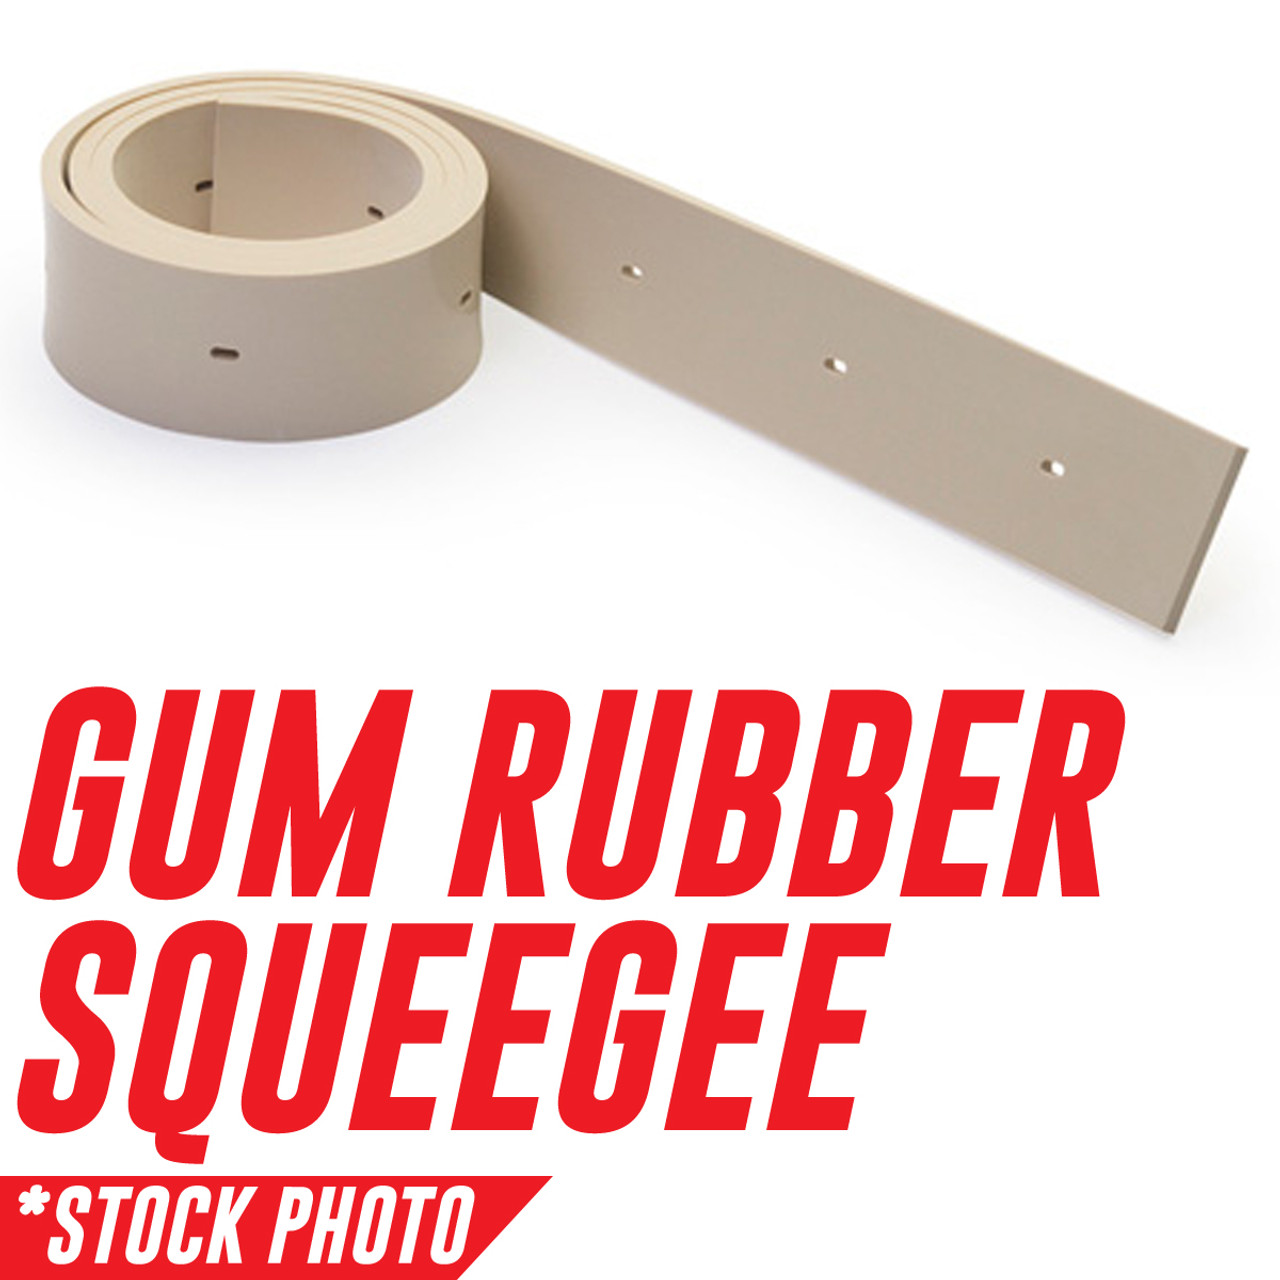 150-754G: Squeegee, Rear 30", Tan Gum fits Factory Cat Models MicroMag, Pilot/RS